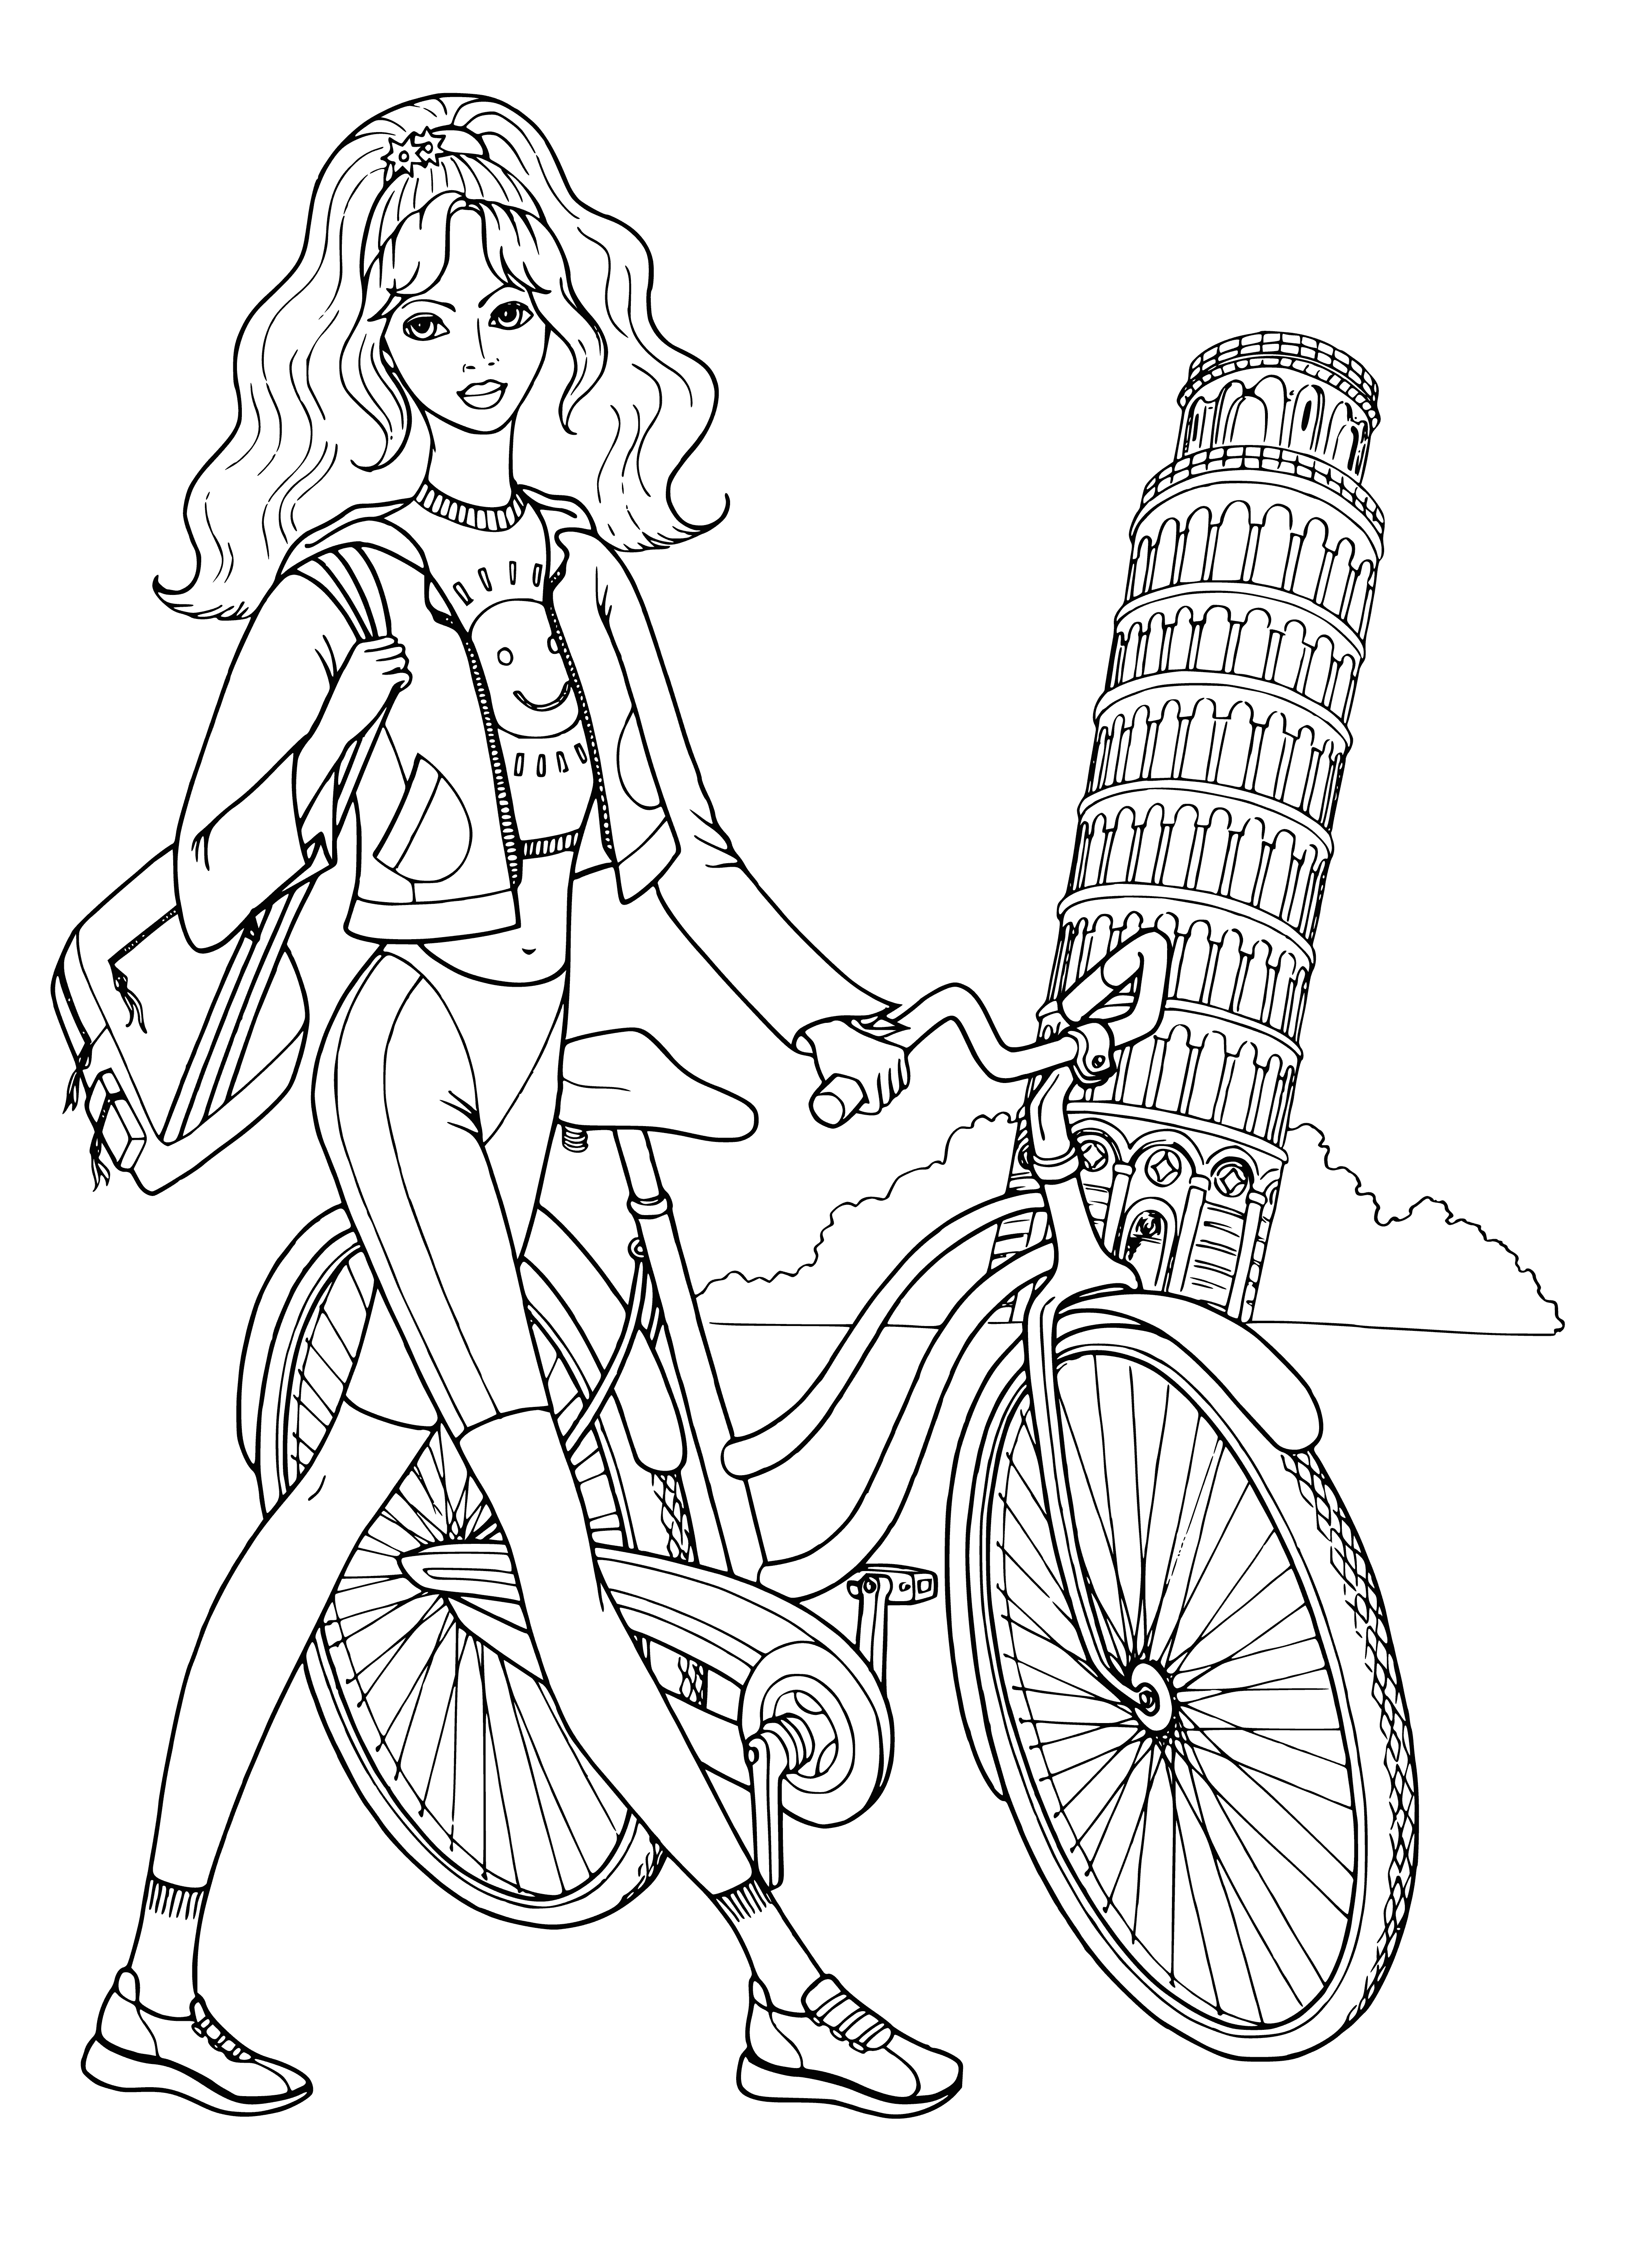 coloring page: Fashion girl sits on a bike with crossed legs, wearing dress & heels, her hair blowing in the wind.